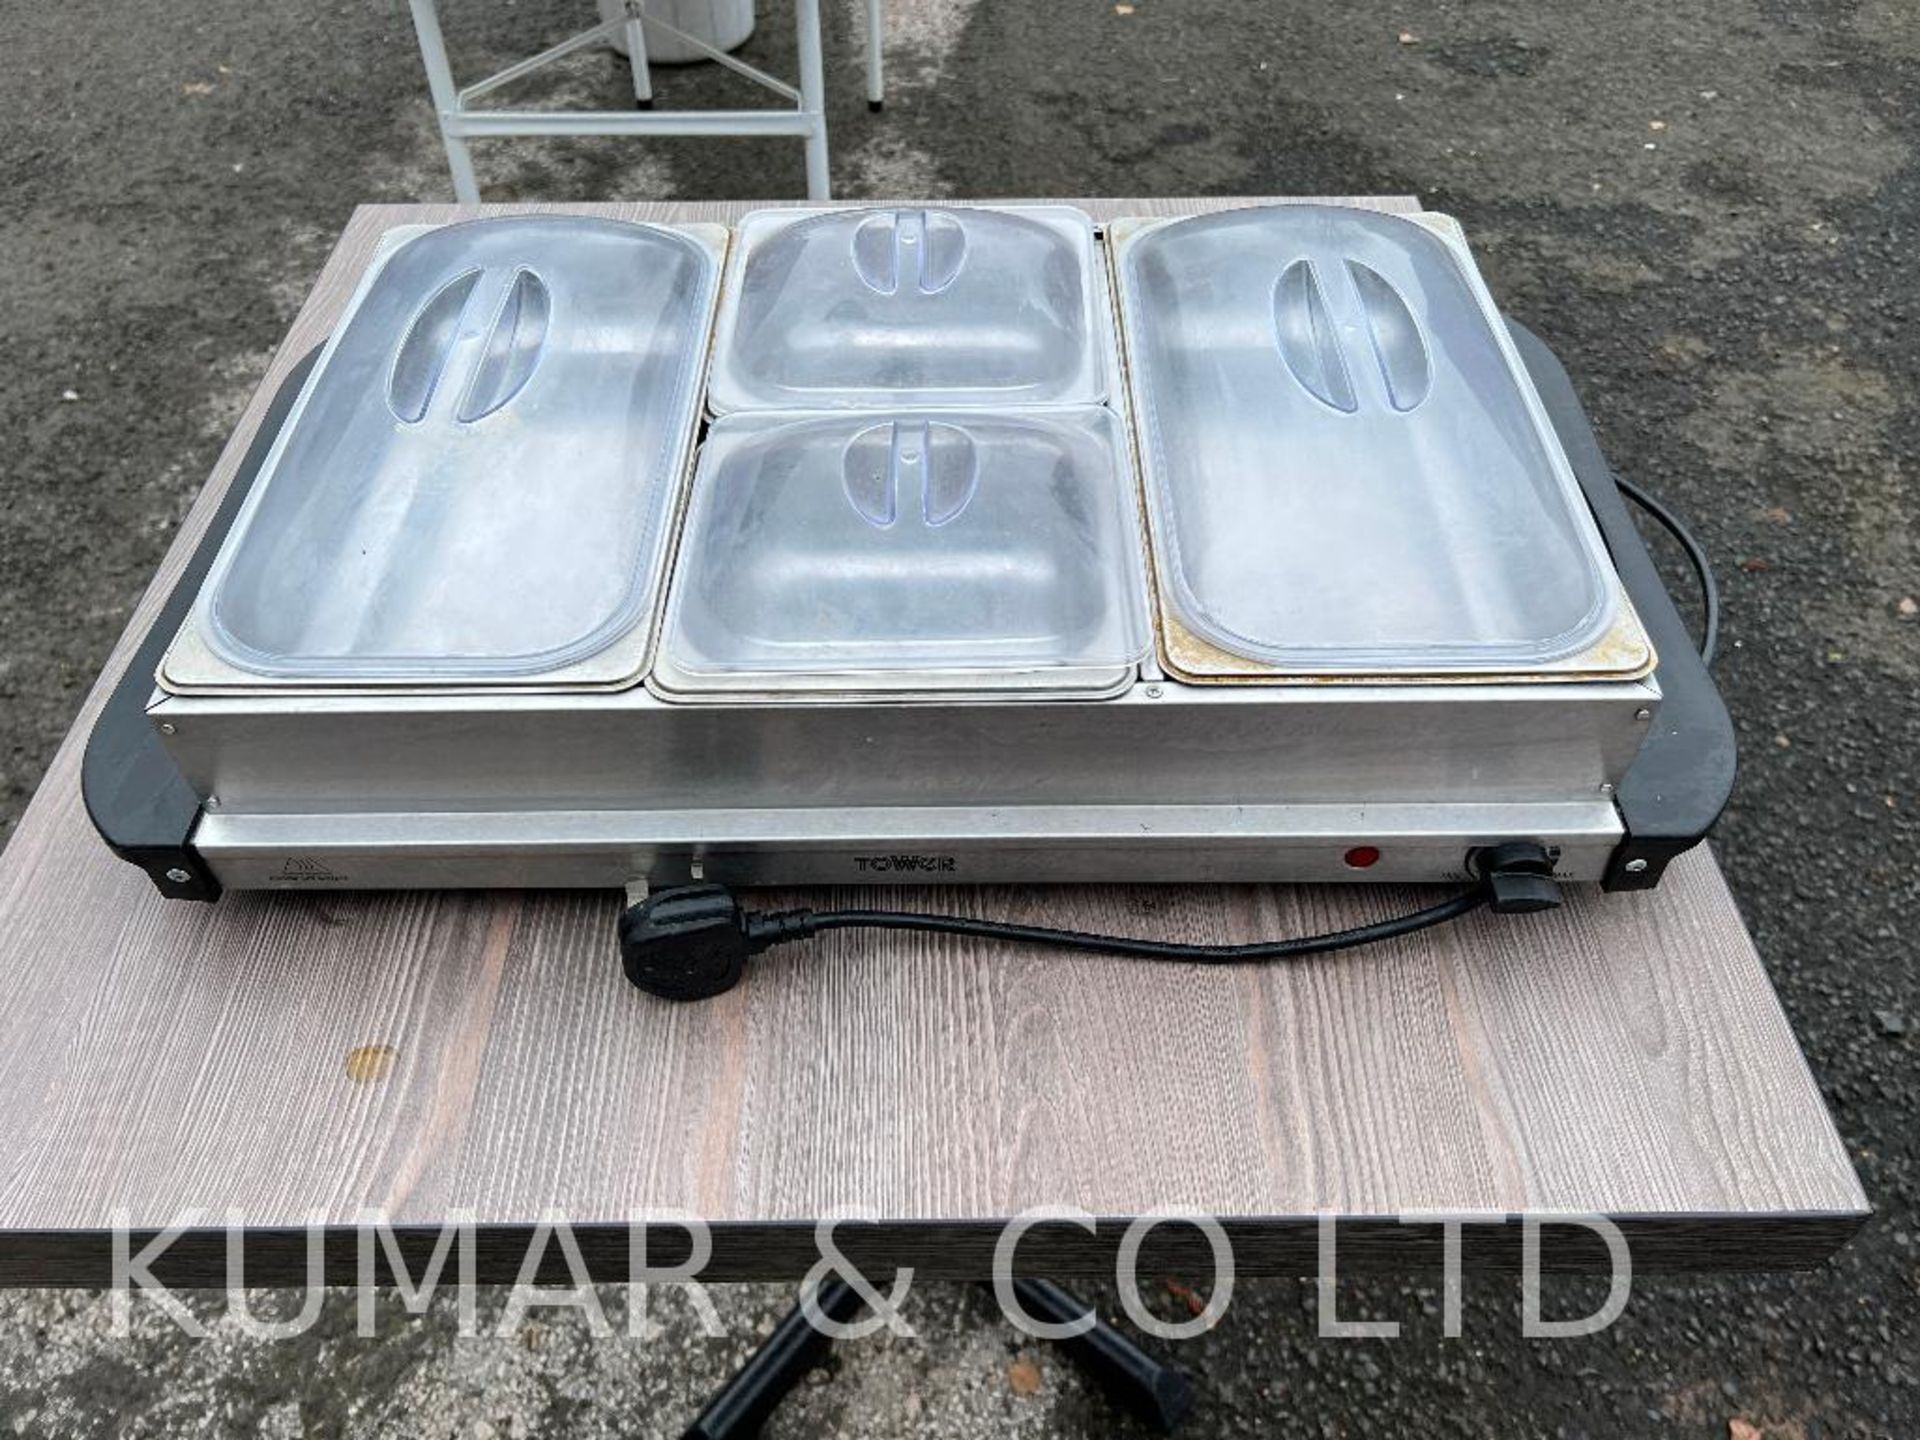 Tower Stainless Steel 4 Tray Buffet Server with 230v UK Domestic Plug. Model No: 350633.